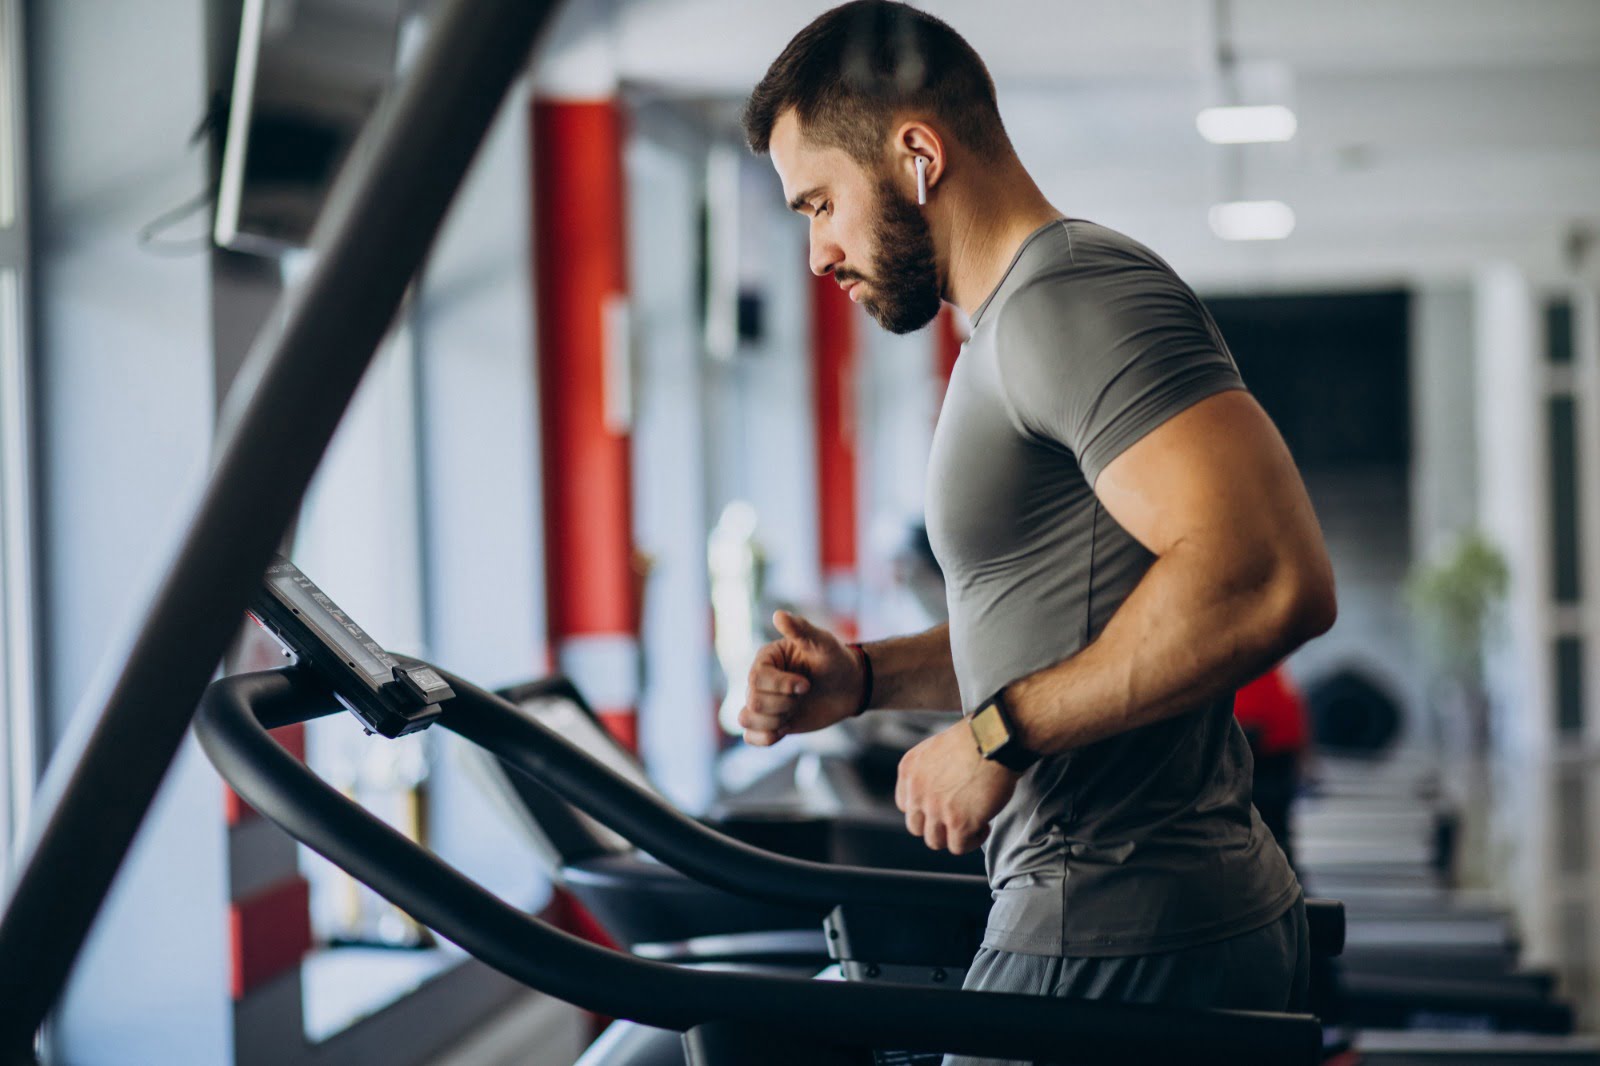 Tips for Getting the Most Out of Your Cardio Workouts